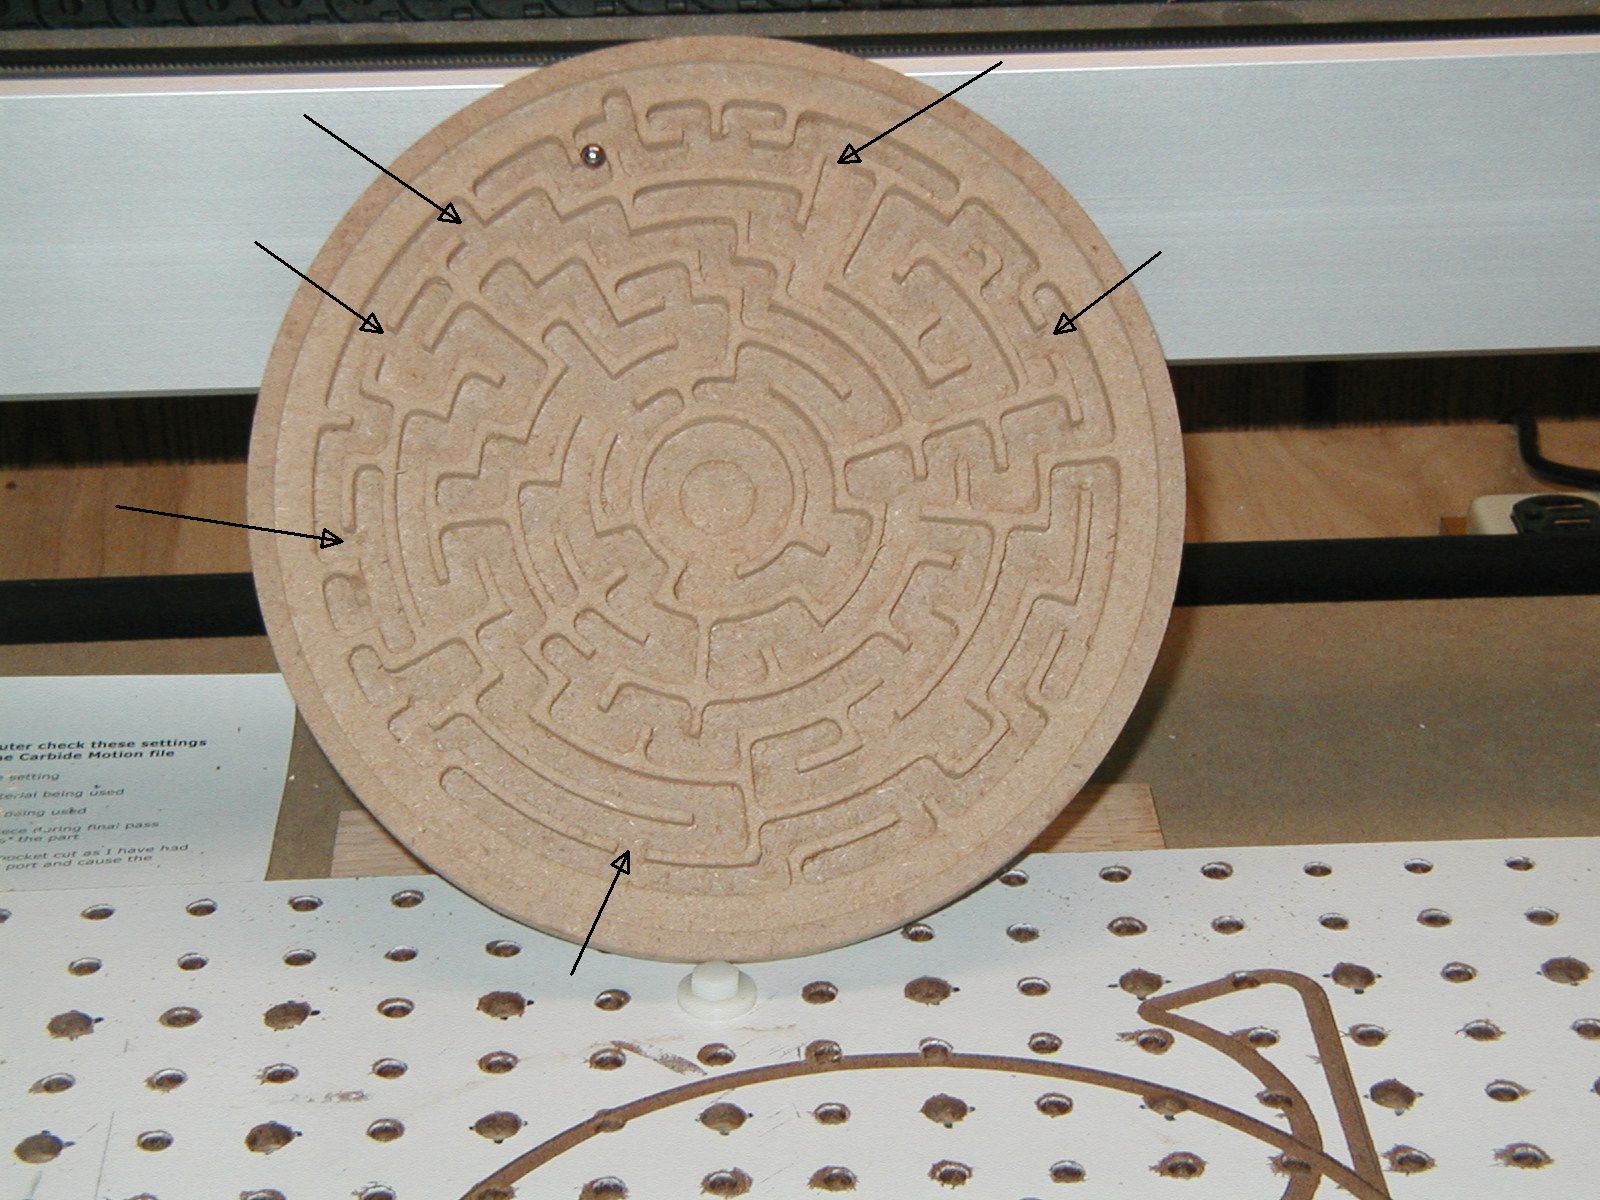 Marble Maze - more characters - Shapeoko - Carbide 3D Community Site